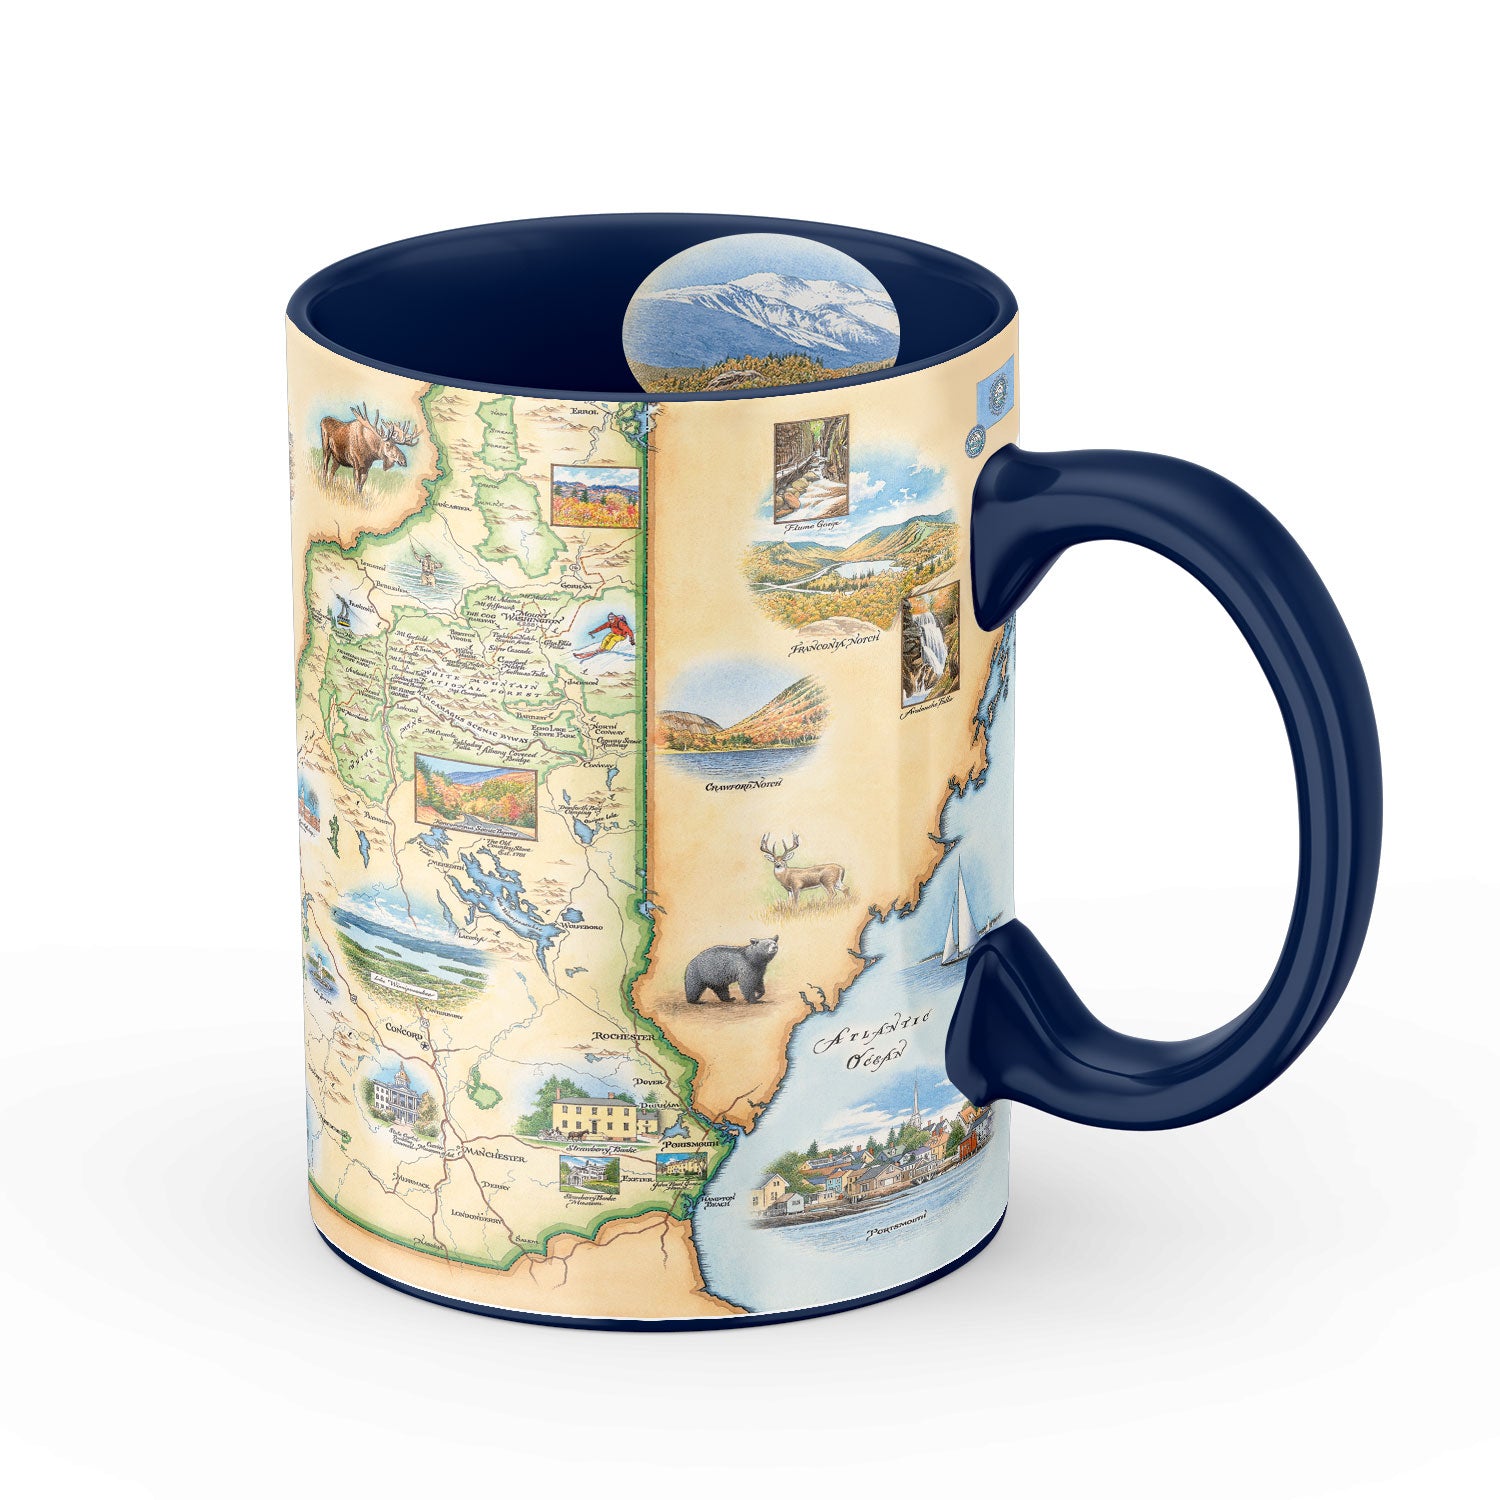 Blue 16 oz New Hampshire state map ceramic coffee mug. The cup features black bear, deer, sail boats, moose, waterfalls, Atlantic Ocean, Franconia Notch State Park, Mount Washington, fly fishing, and Crawford Notch.